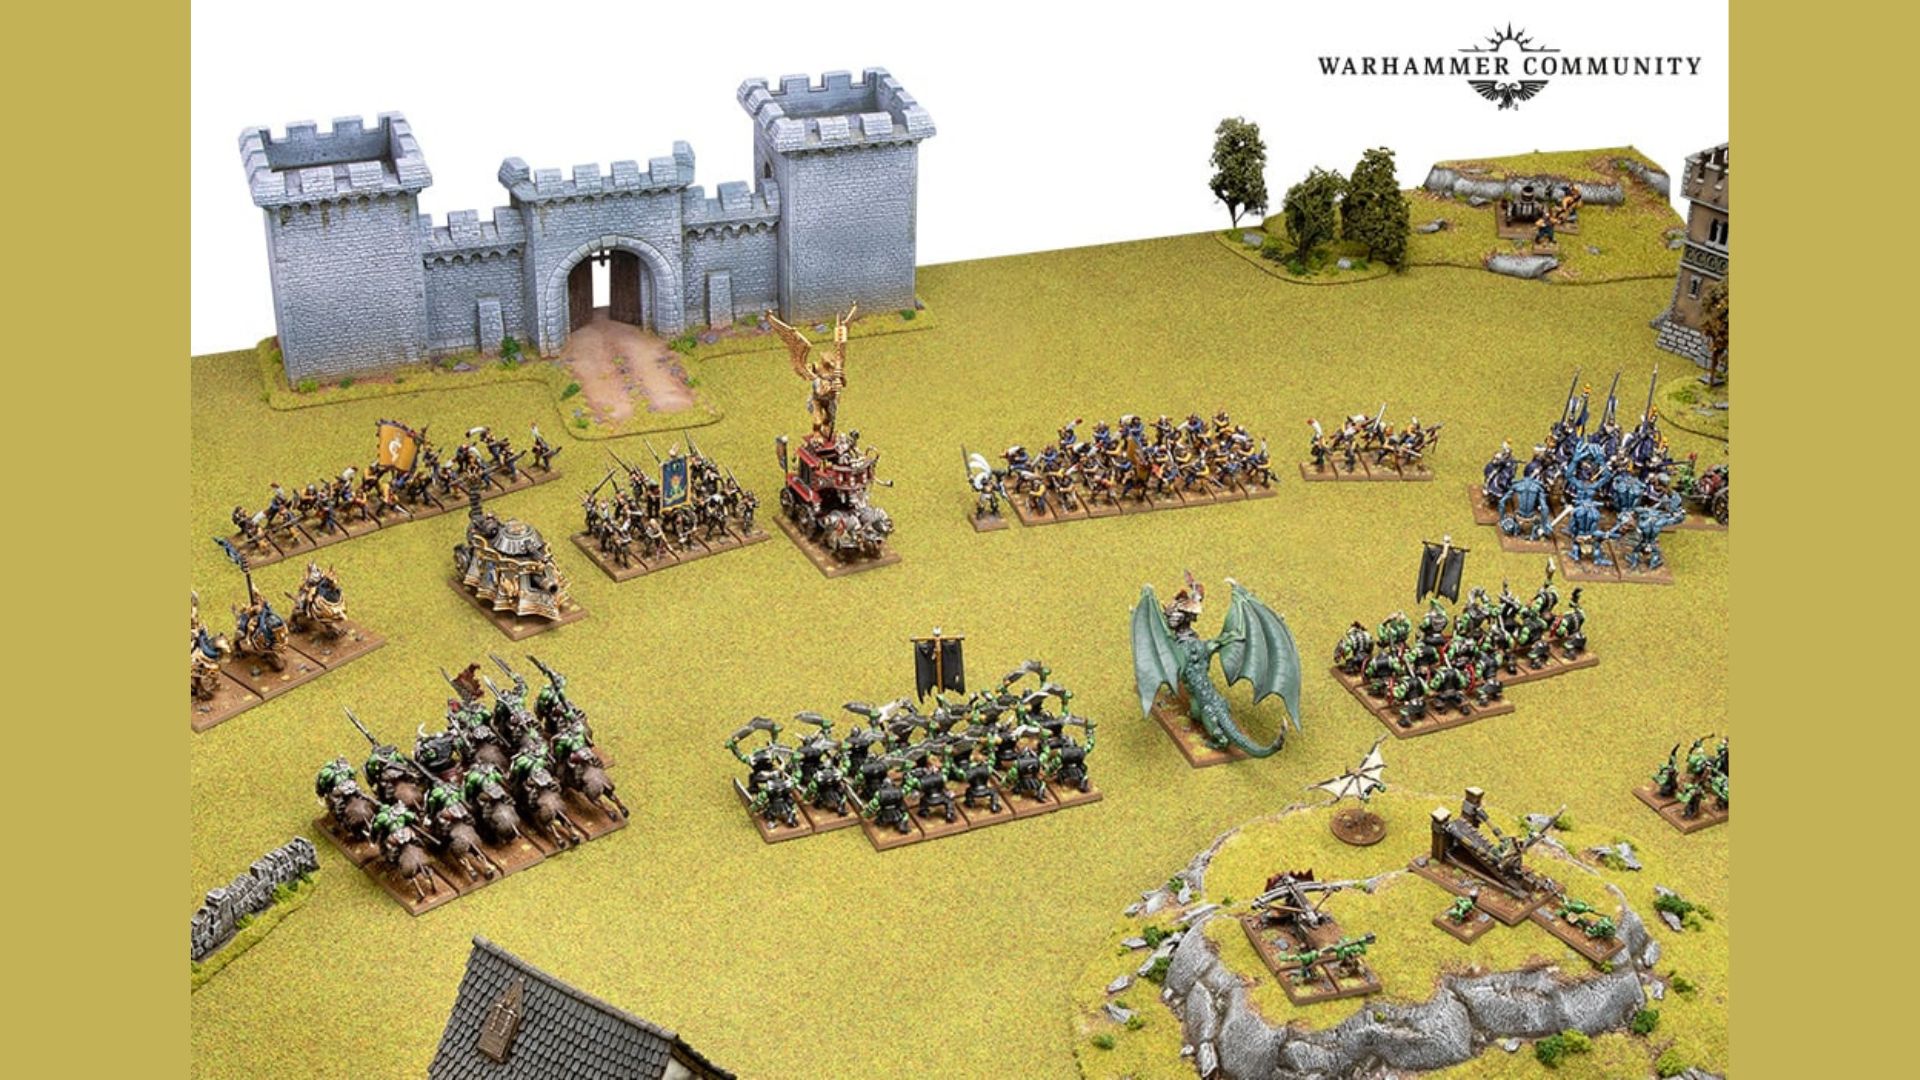 Warhammer fans hate change and when things stay the same - classic Warhammer Fantasy Battle, ranks of soldiers on a green battlefield